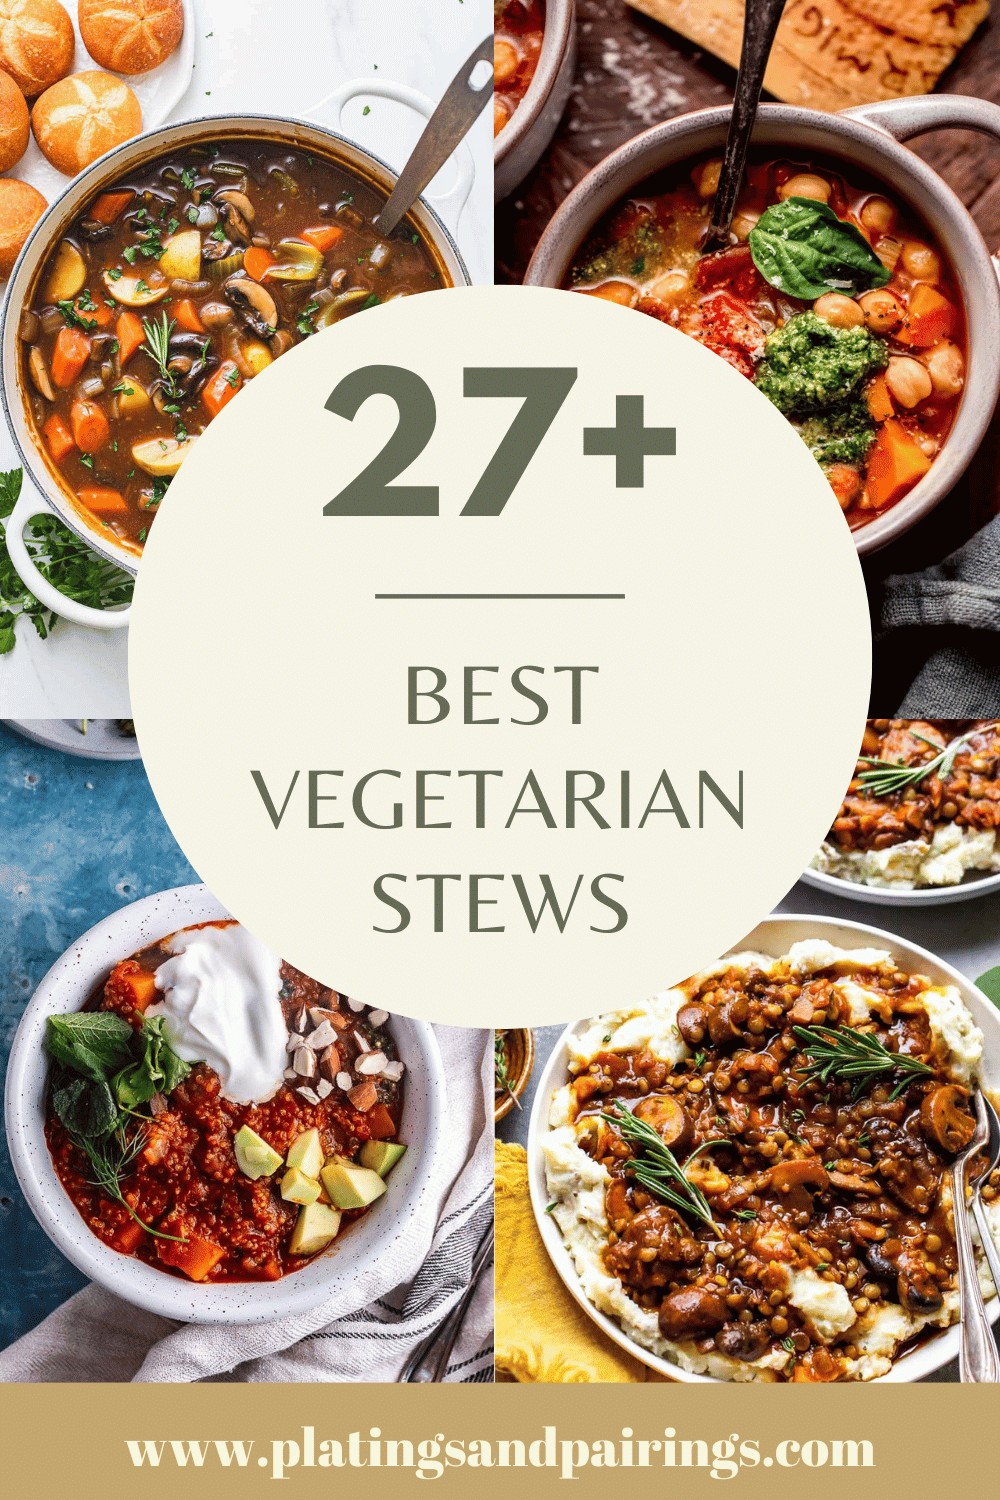 Collage of vegetarian stews with text overlay.